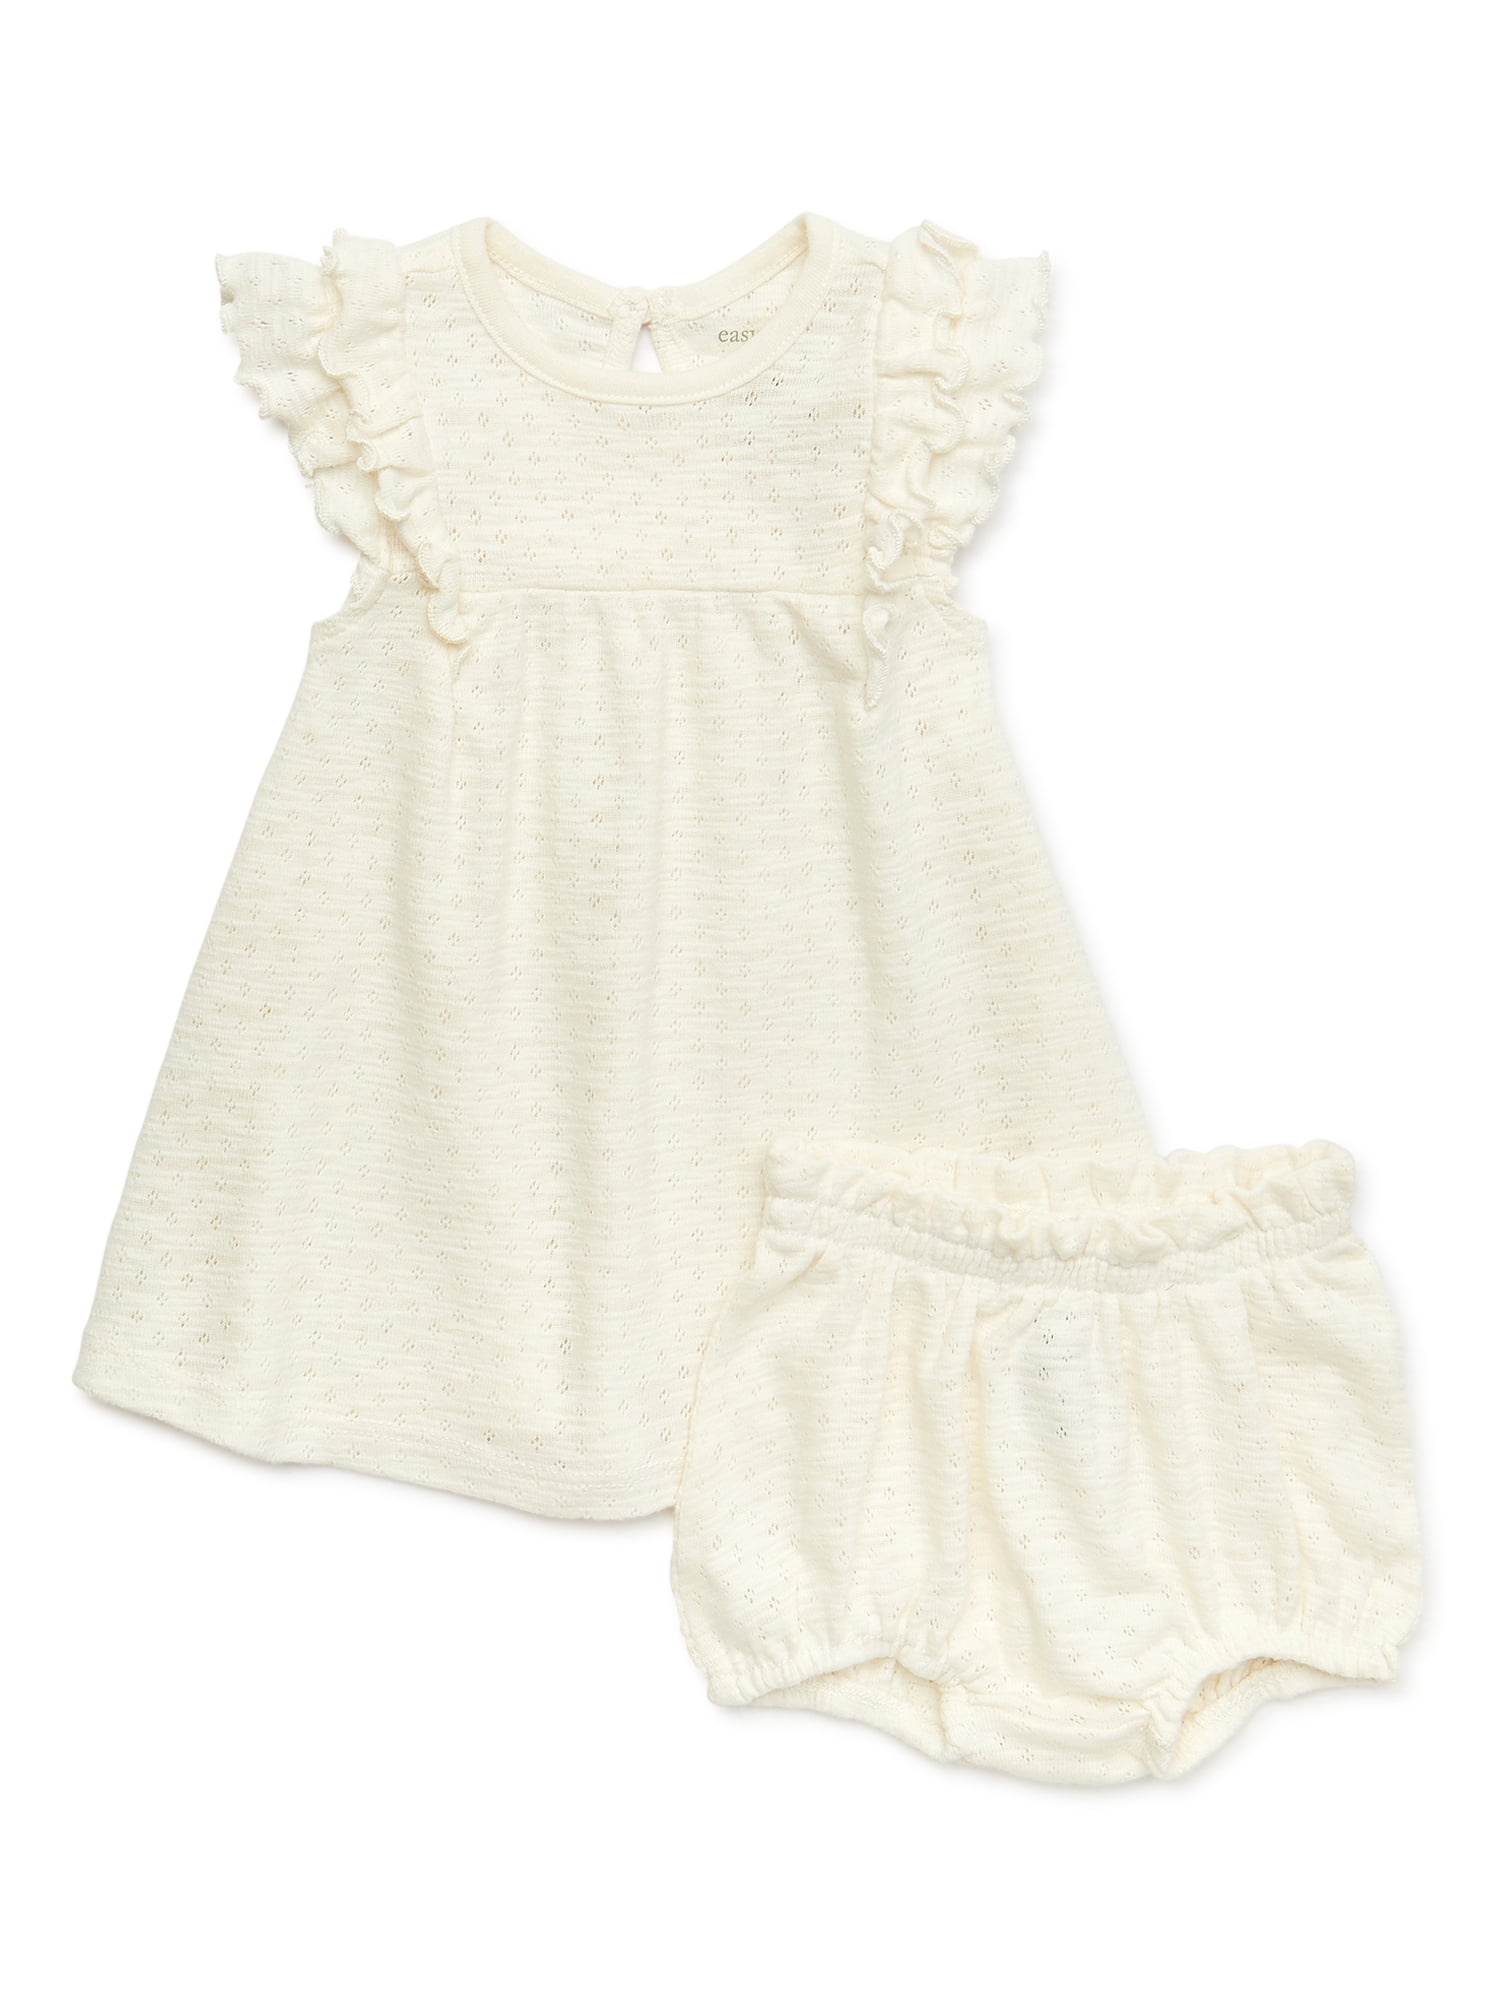 easy-peasy Baby Girl Ruffled Pointelle Dress with Diaper Cover, Sizes 0/3M-24M